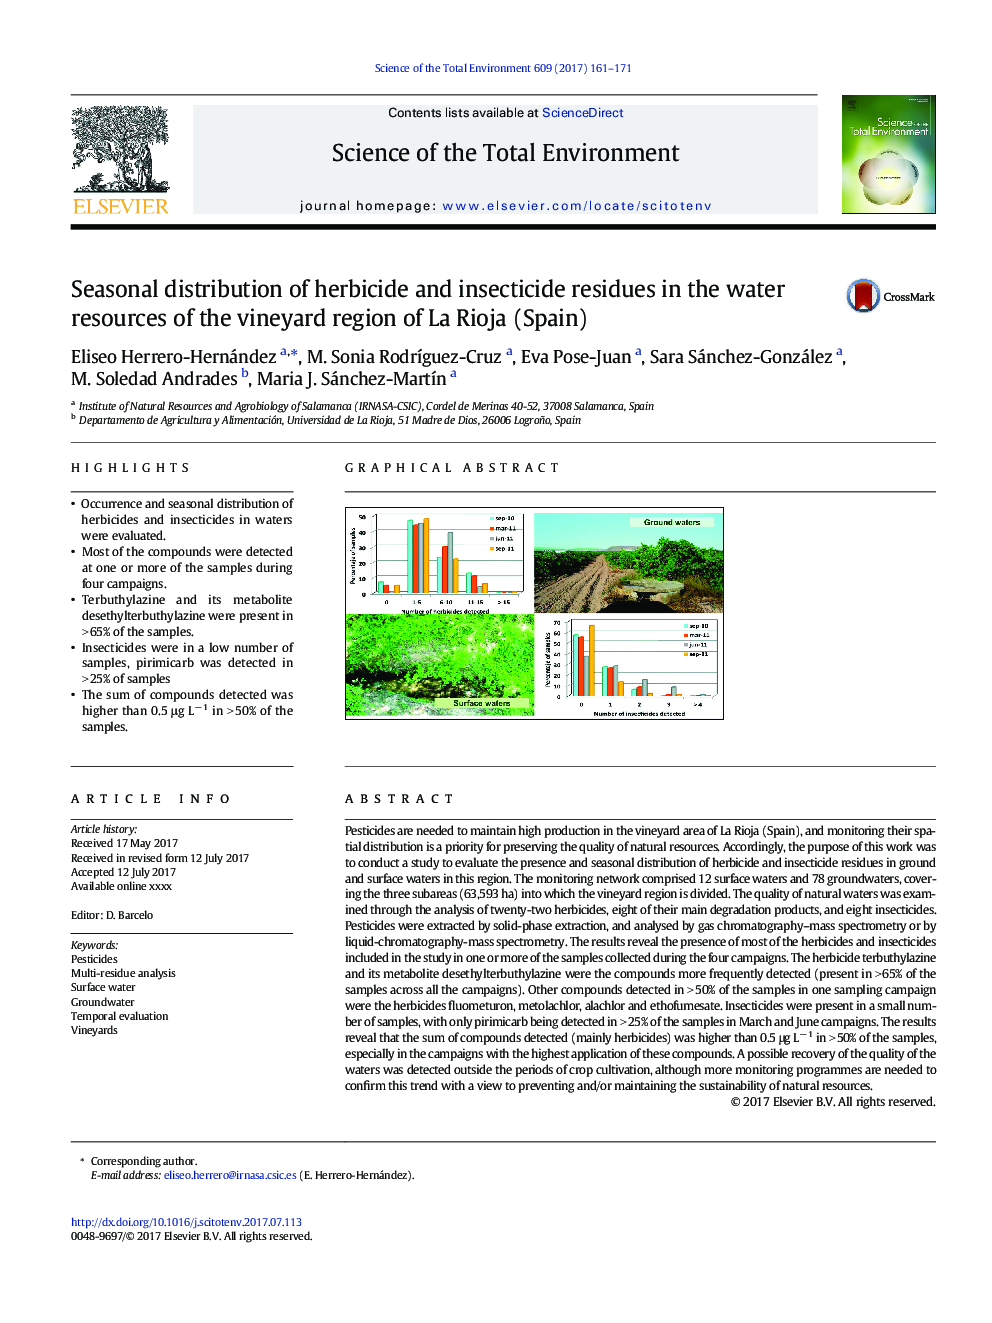 Seasonal distribution of herbicide and insecticide residues in the water resources of the vineyard region of La Rioja (Spain)